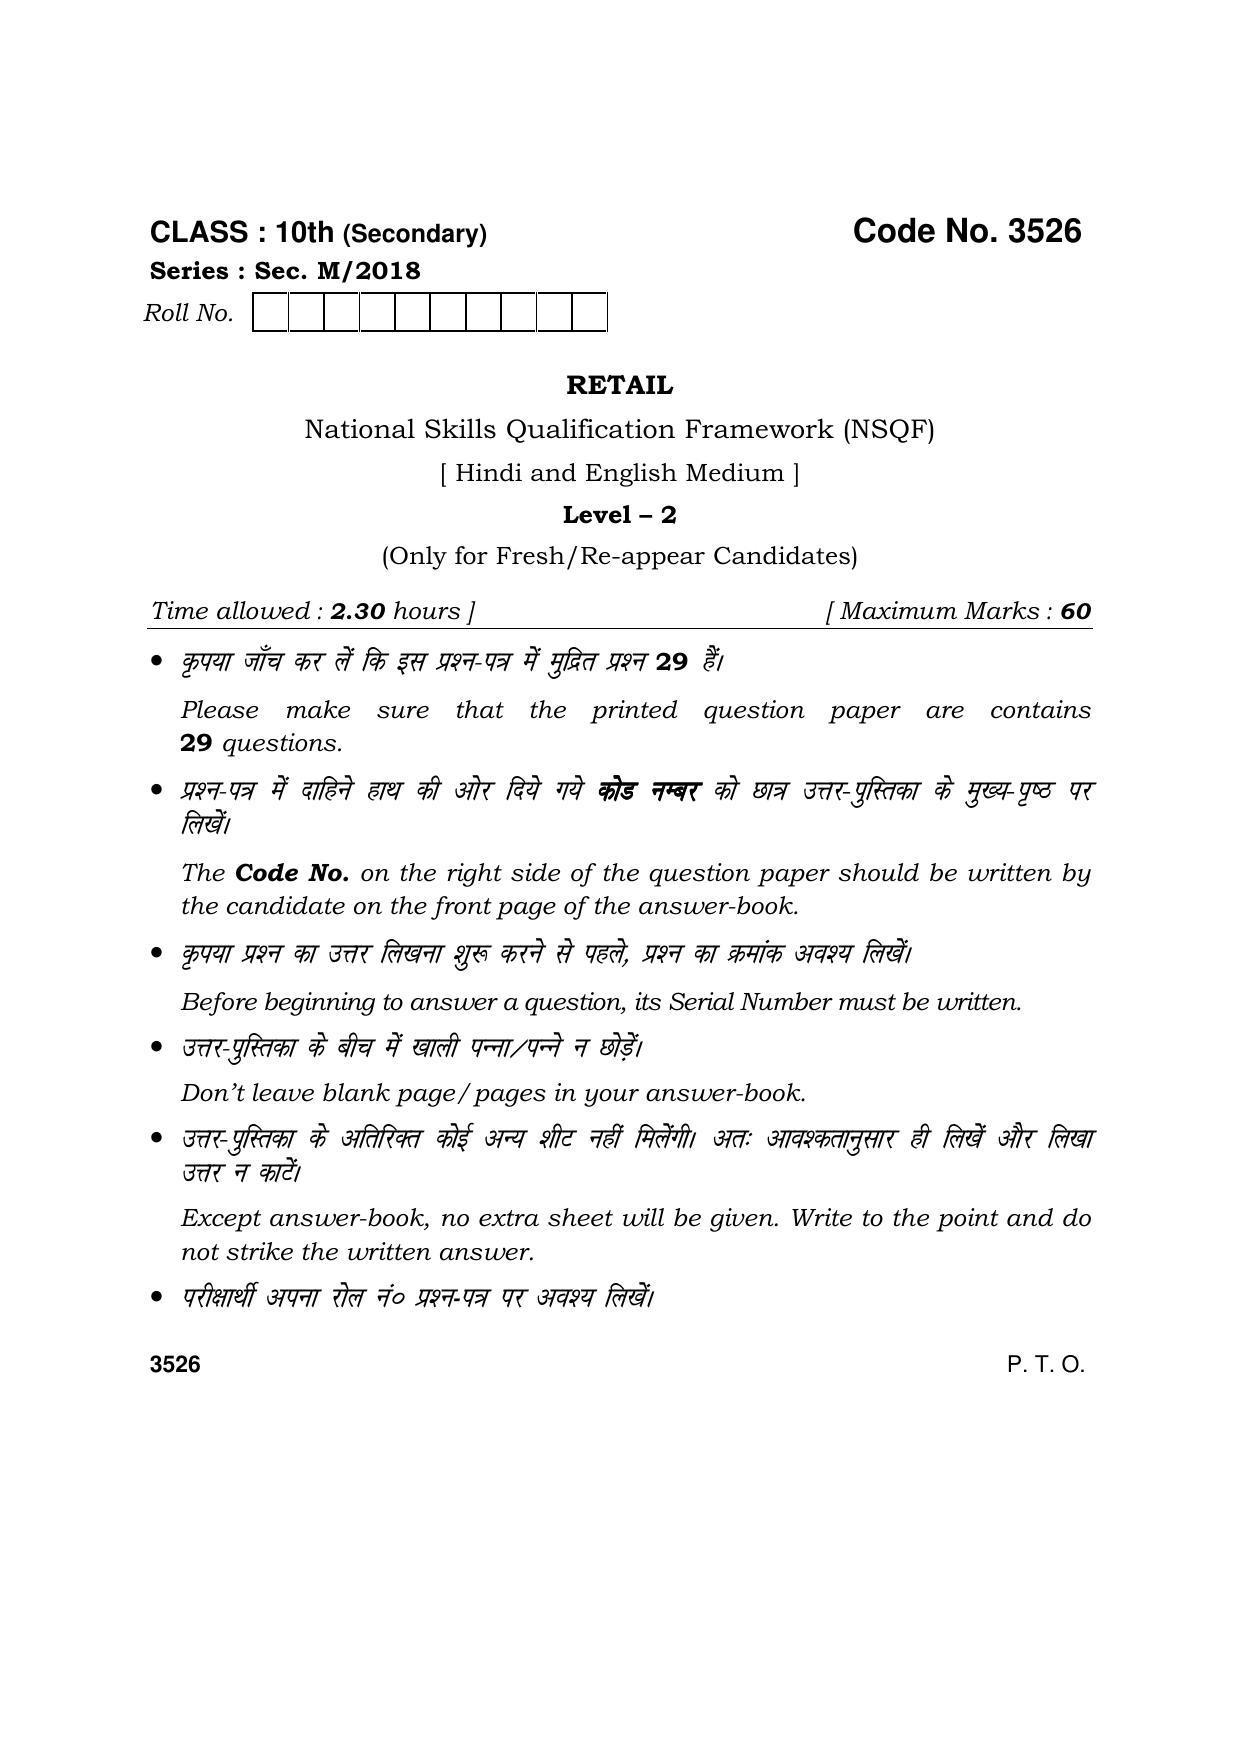 Haryana Board HBSE Class 10 Retail 2018 Question Paper - Page 1